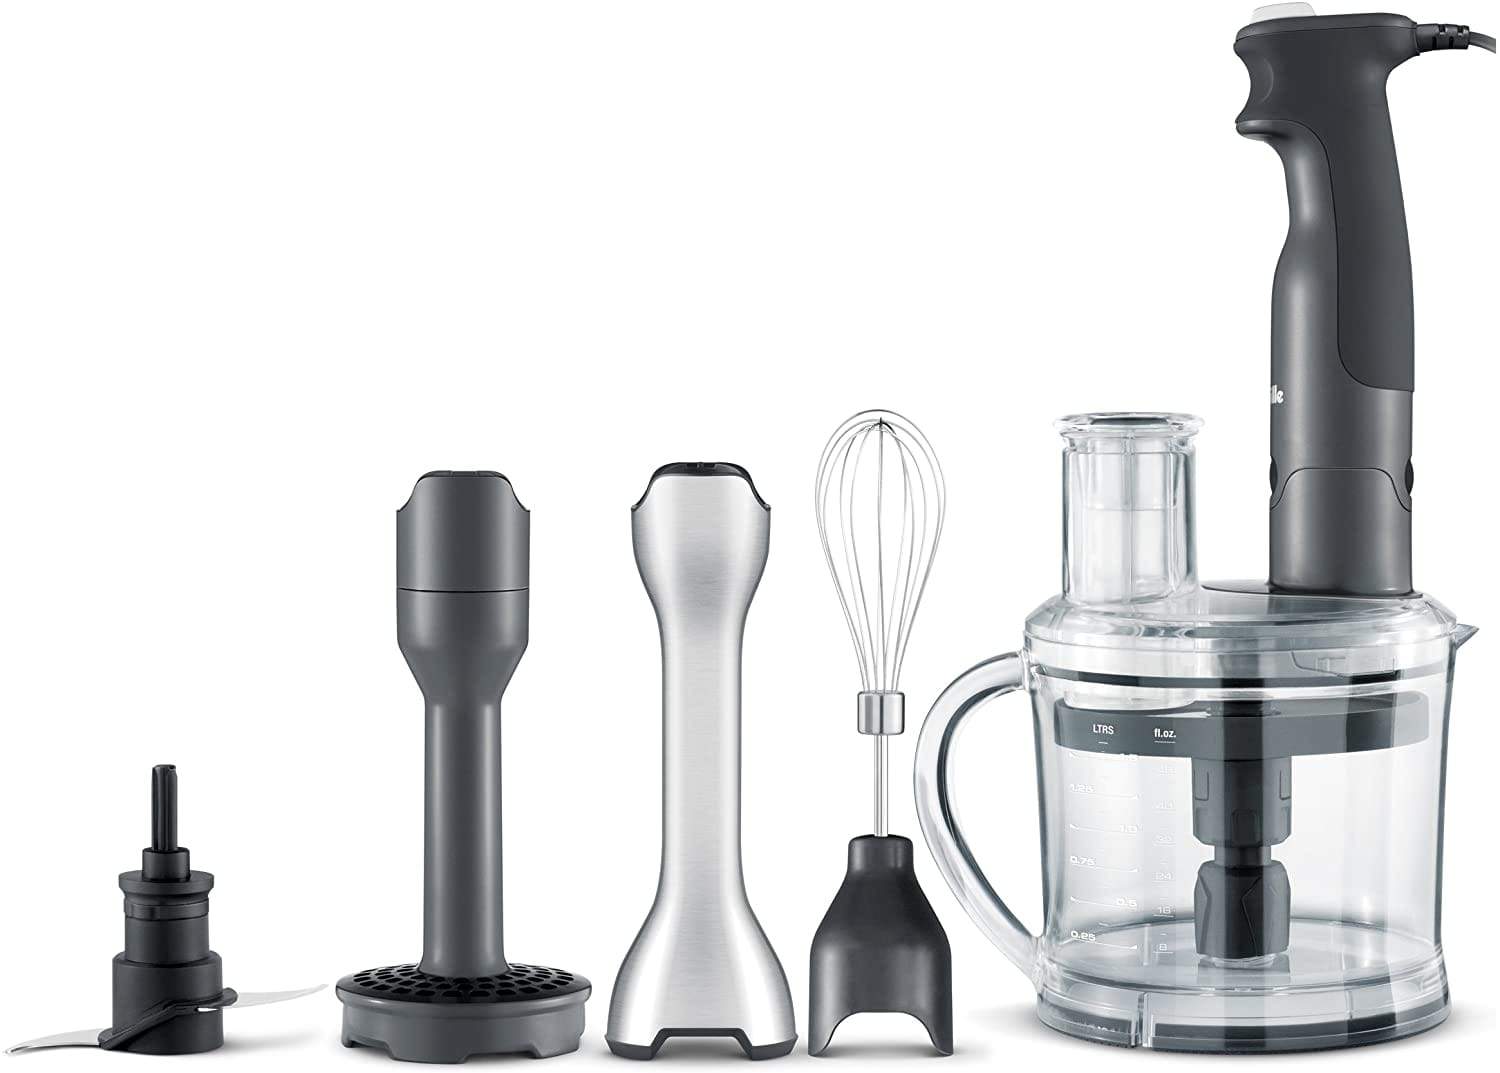 https://cdn.shopify.com/s/files/1/0474/2338/9856/products/breville-breville-all-in-one-immersion-blender-w-accessories-brushed-stainless-39410-29693610688672_1600x.jpg?v=1628197542